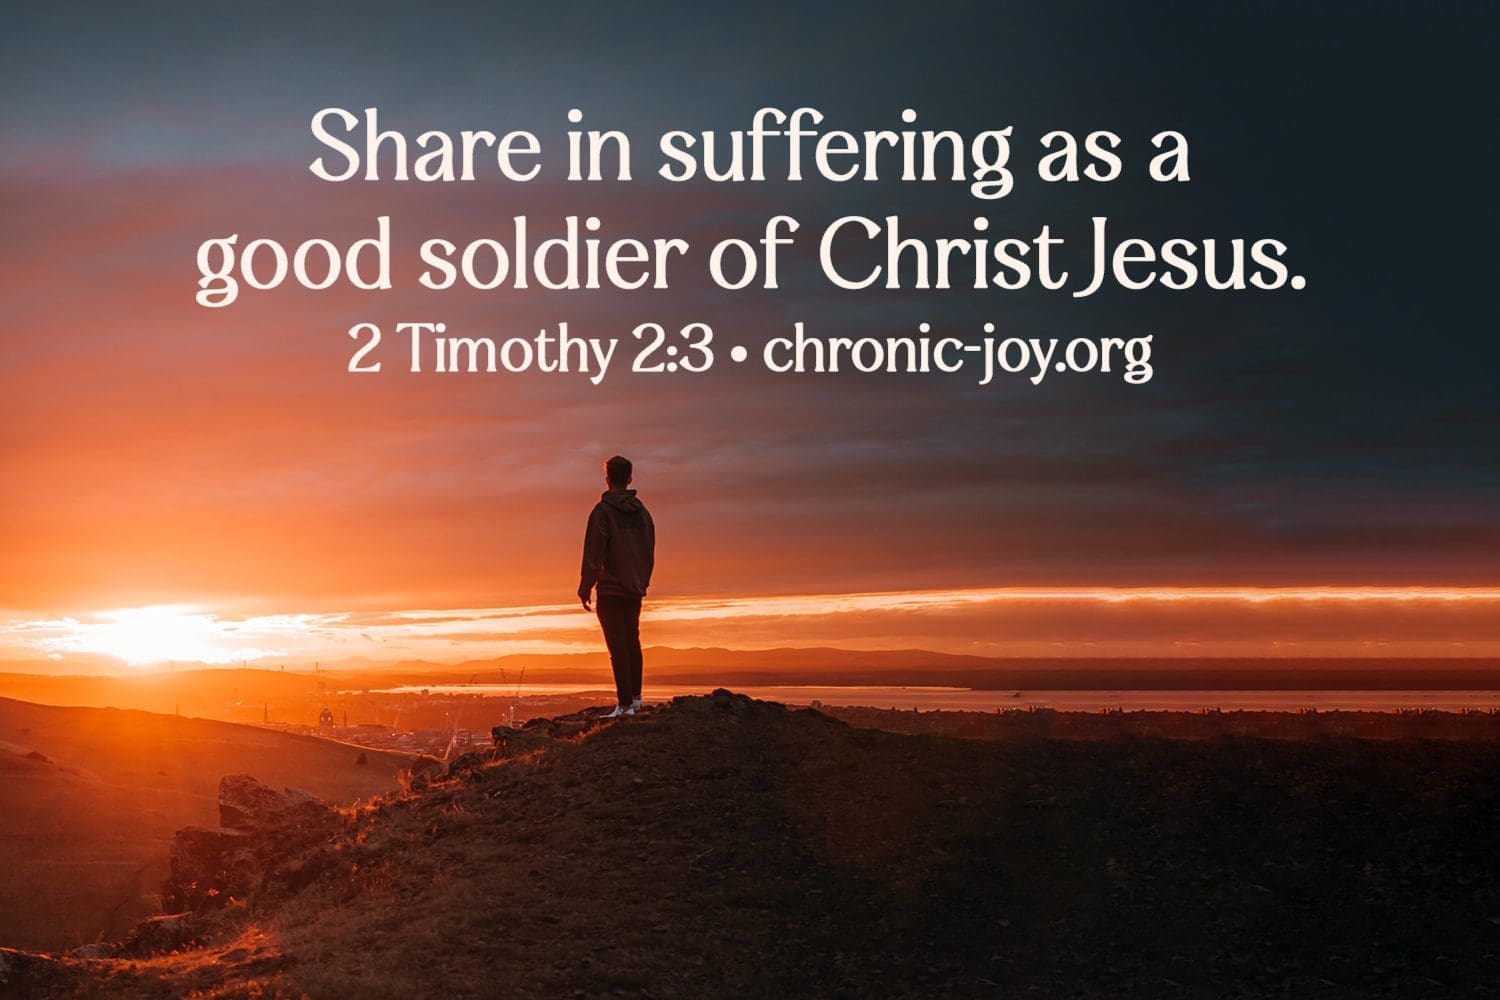 "Share in suffering as a good soldier of Christ Jesus." 2 Timothy 2:3